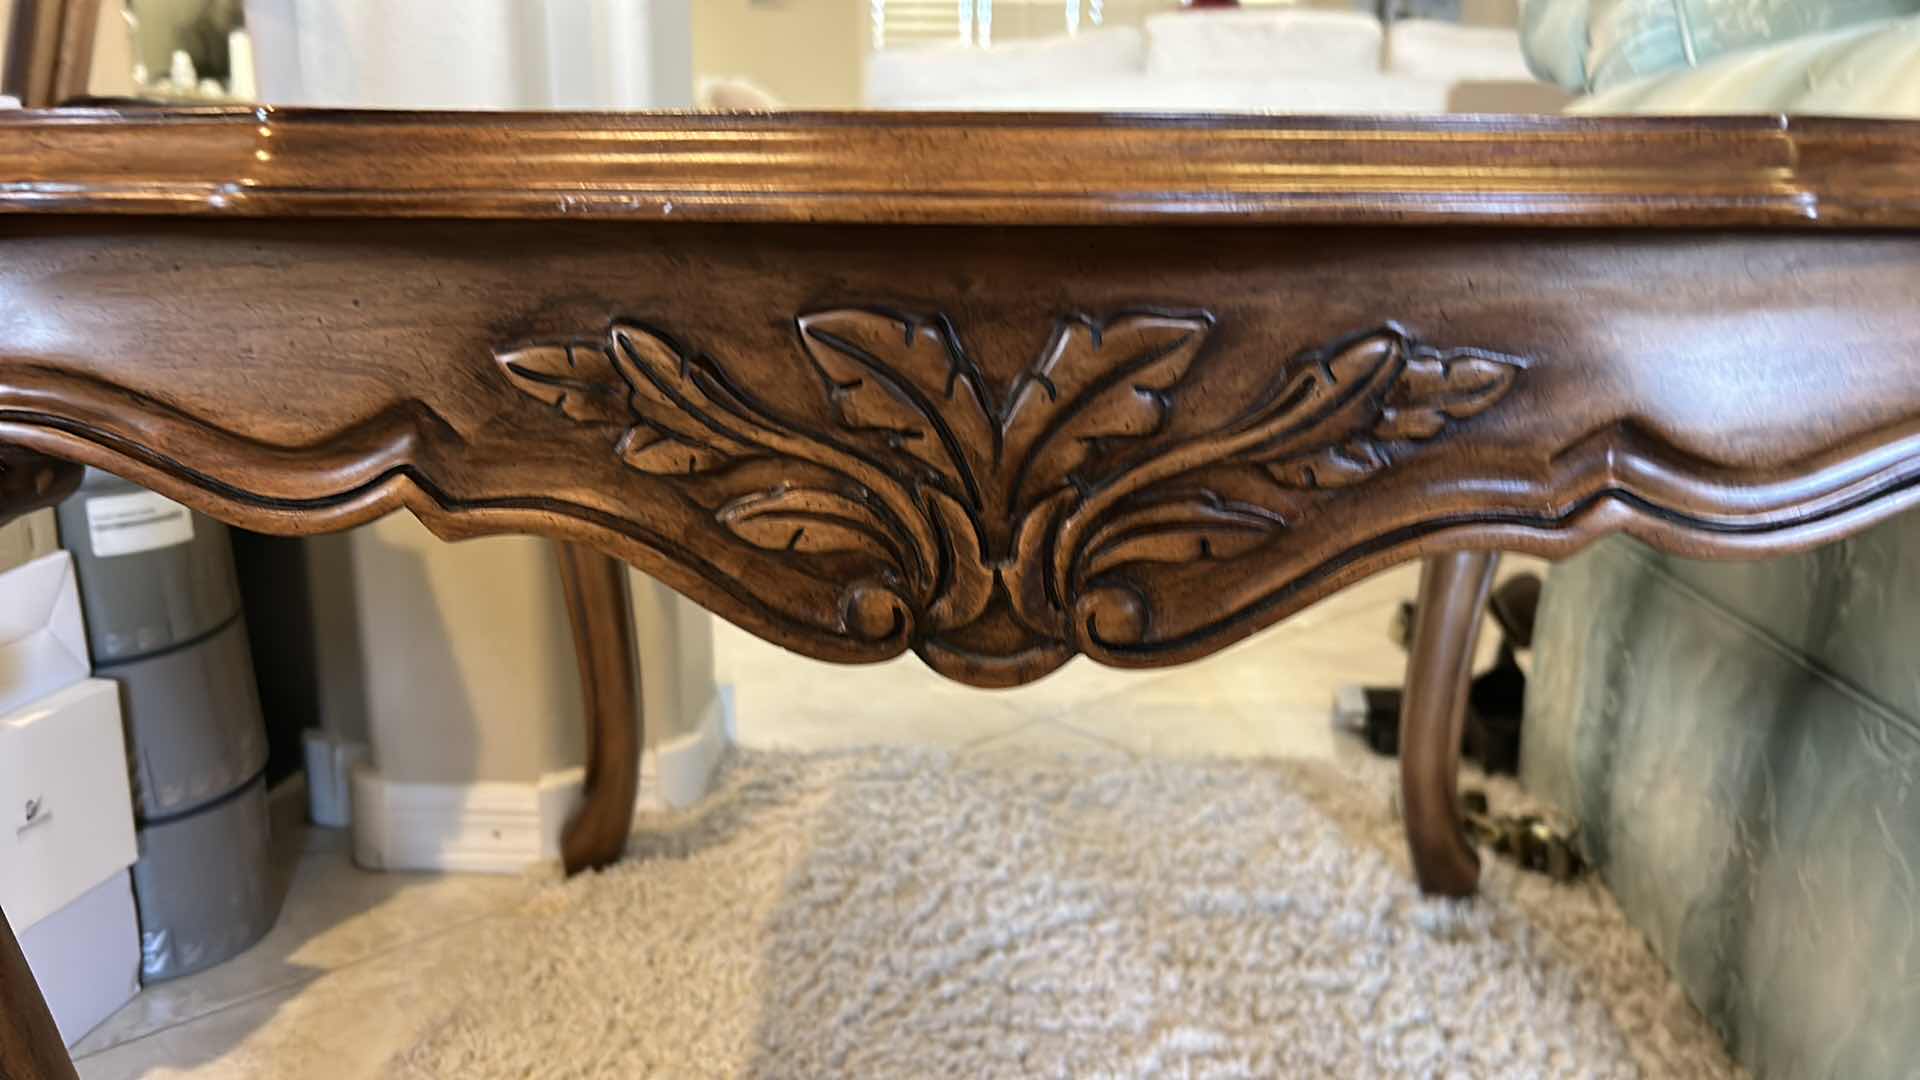 Photo 5 of ORNATELY CARVED WOOD SIDE TABLE 30” x 32” x 22”